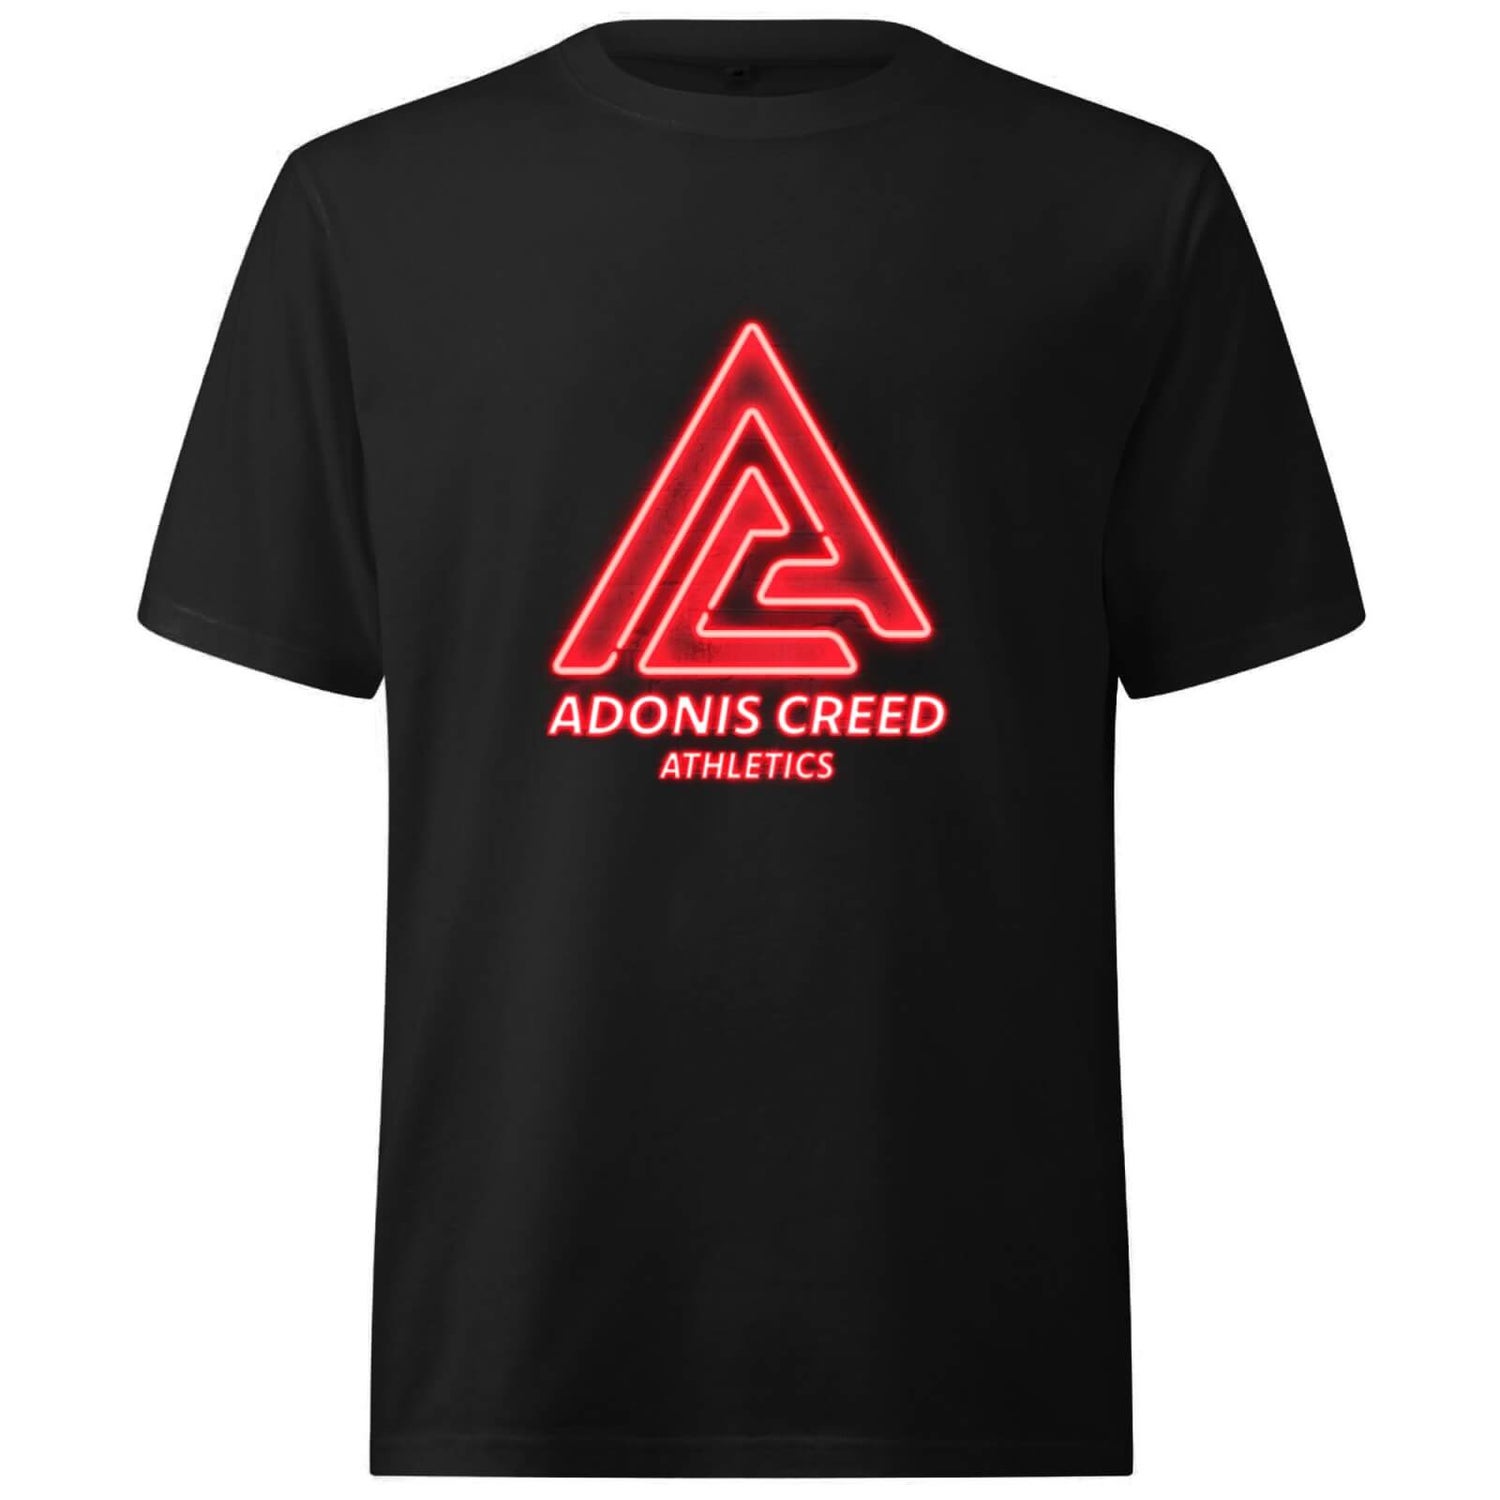 Creed Adonis Creed Athletics Neon Sign Oversized Heavyweight T-Shirt - Black - XS